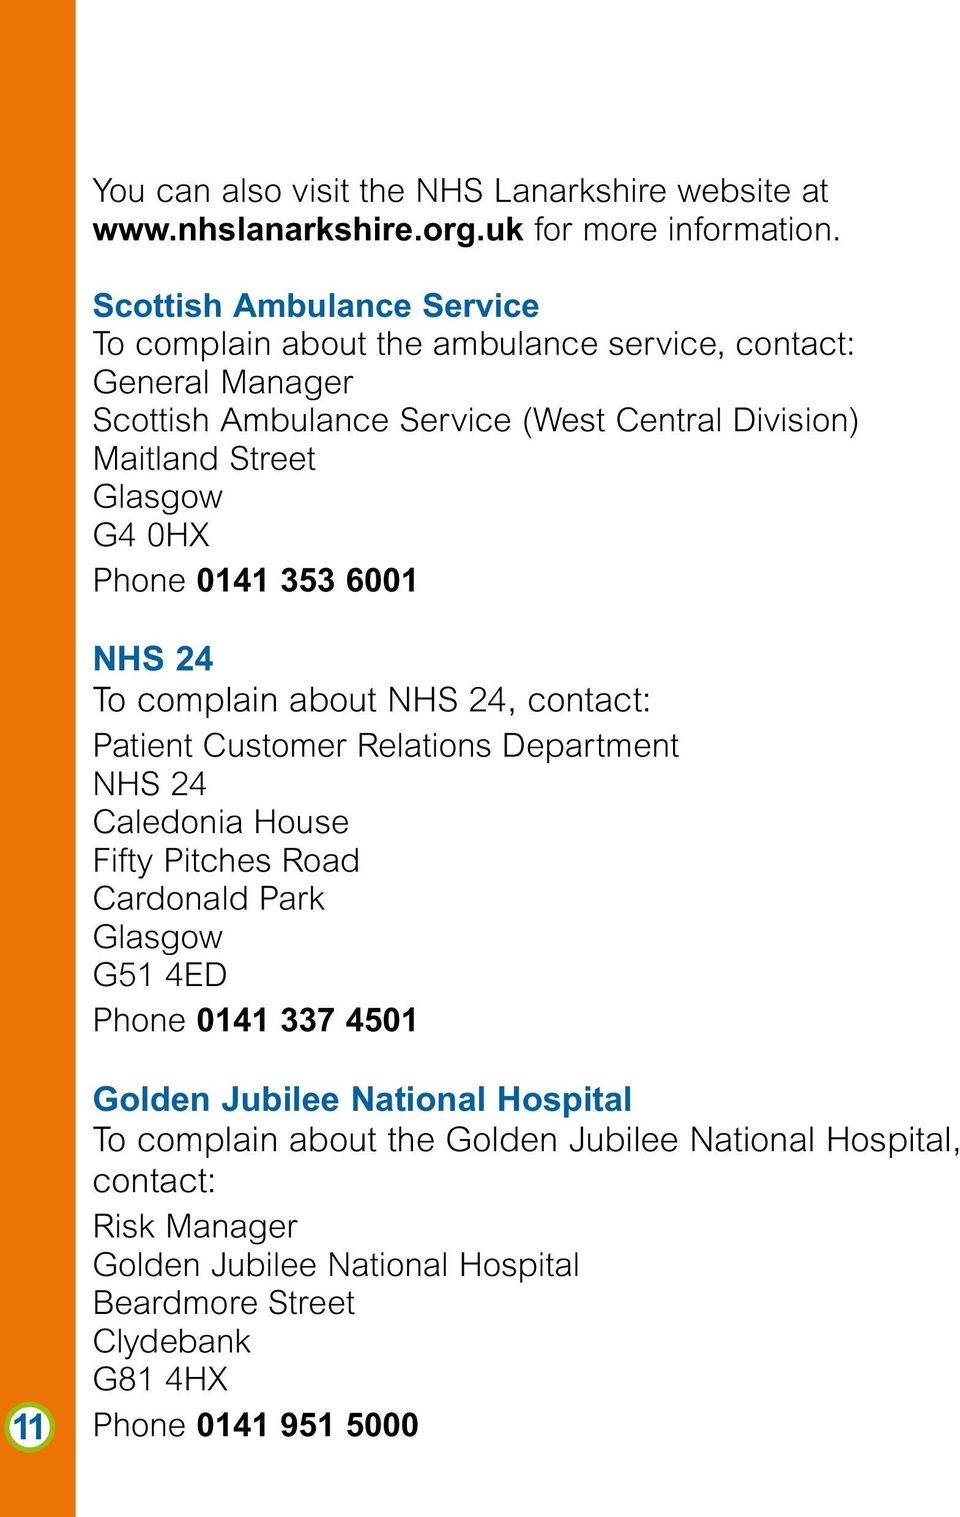 Glasgow G4 0HX Phone 0141 353 6001 NHS 24 To complain about NHS 24, contact: Patient Customer Relations Department NHS 24 Caledonia House Fifty Pitches Road Cardonald